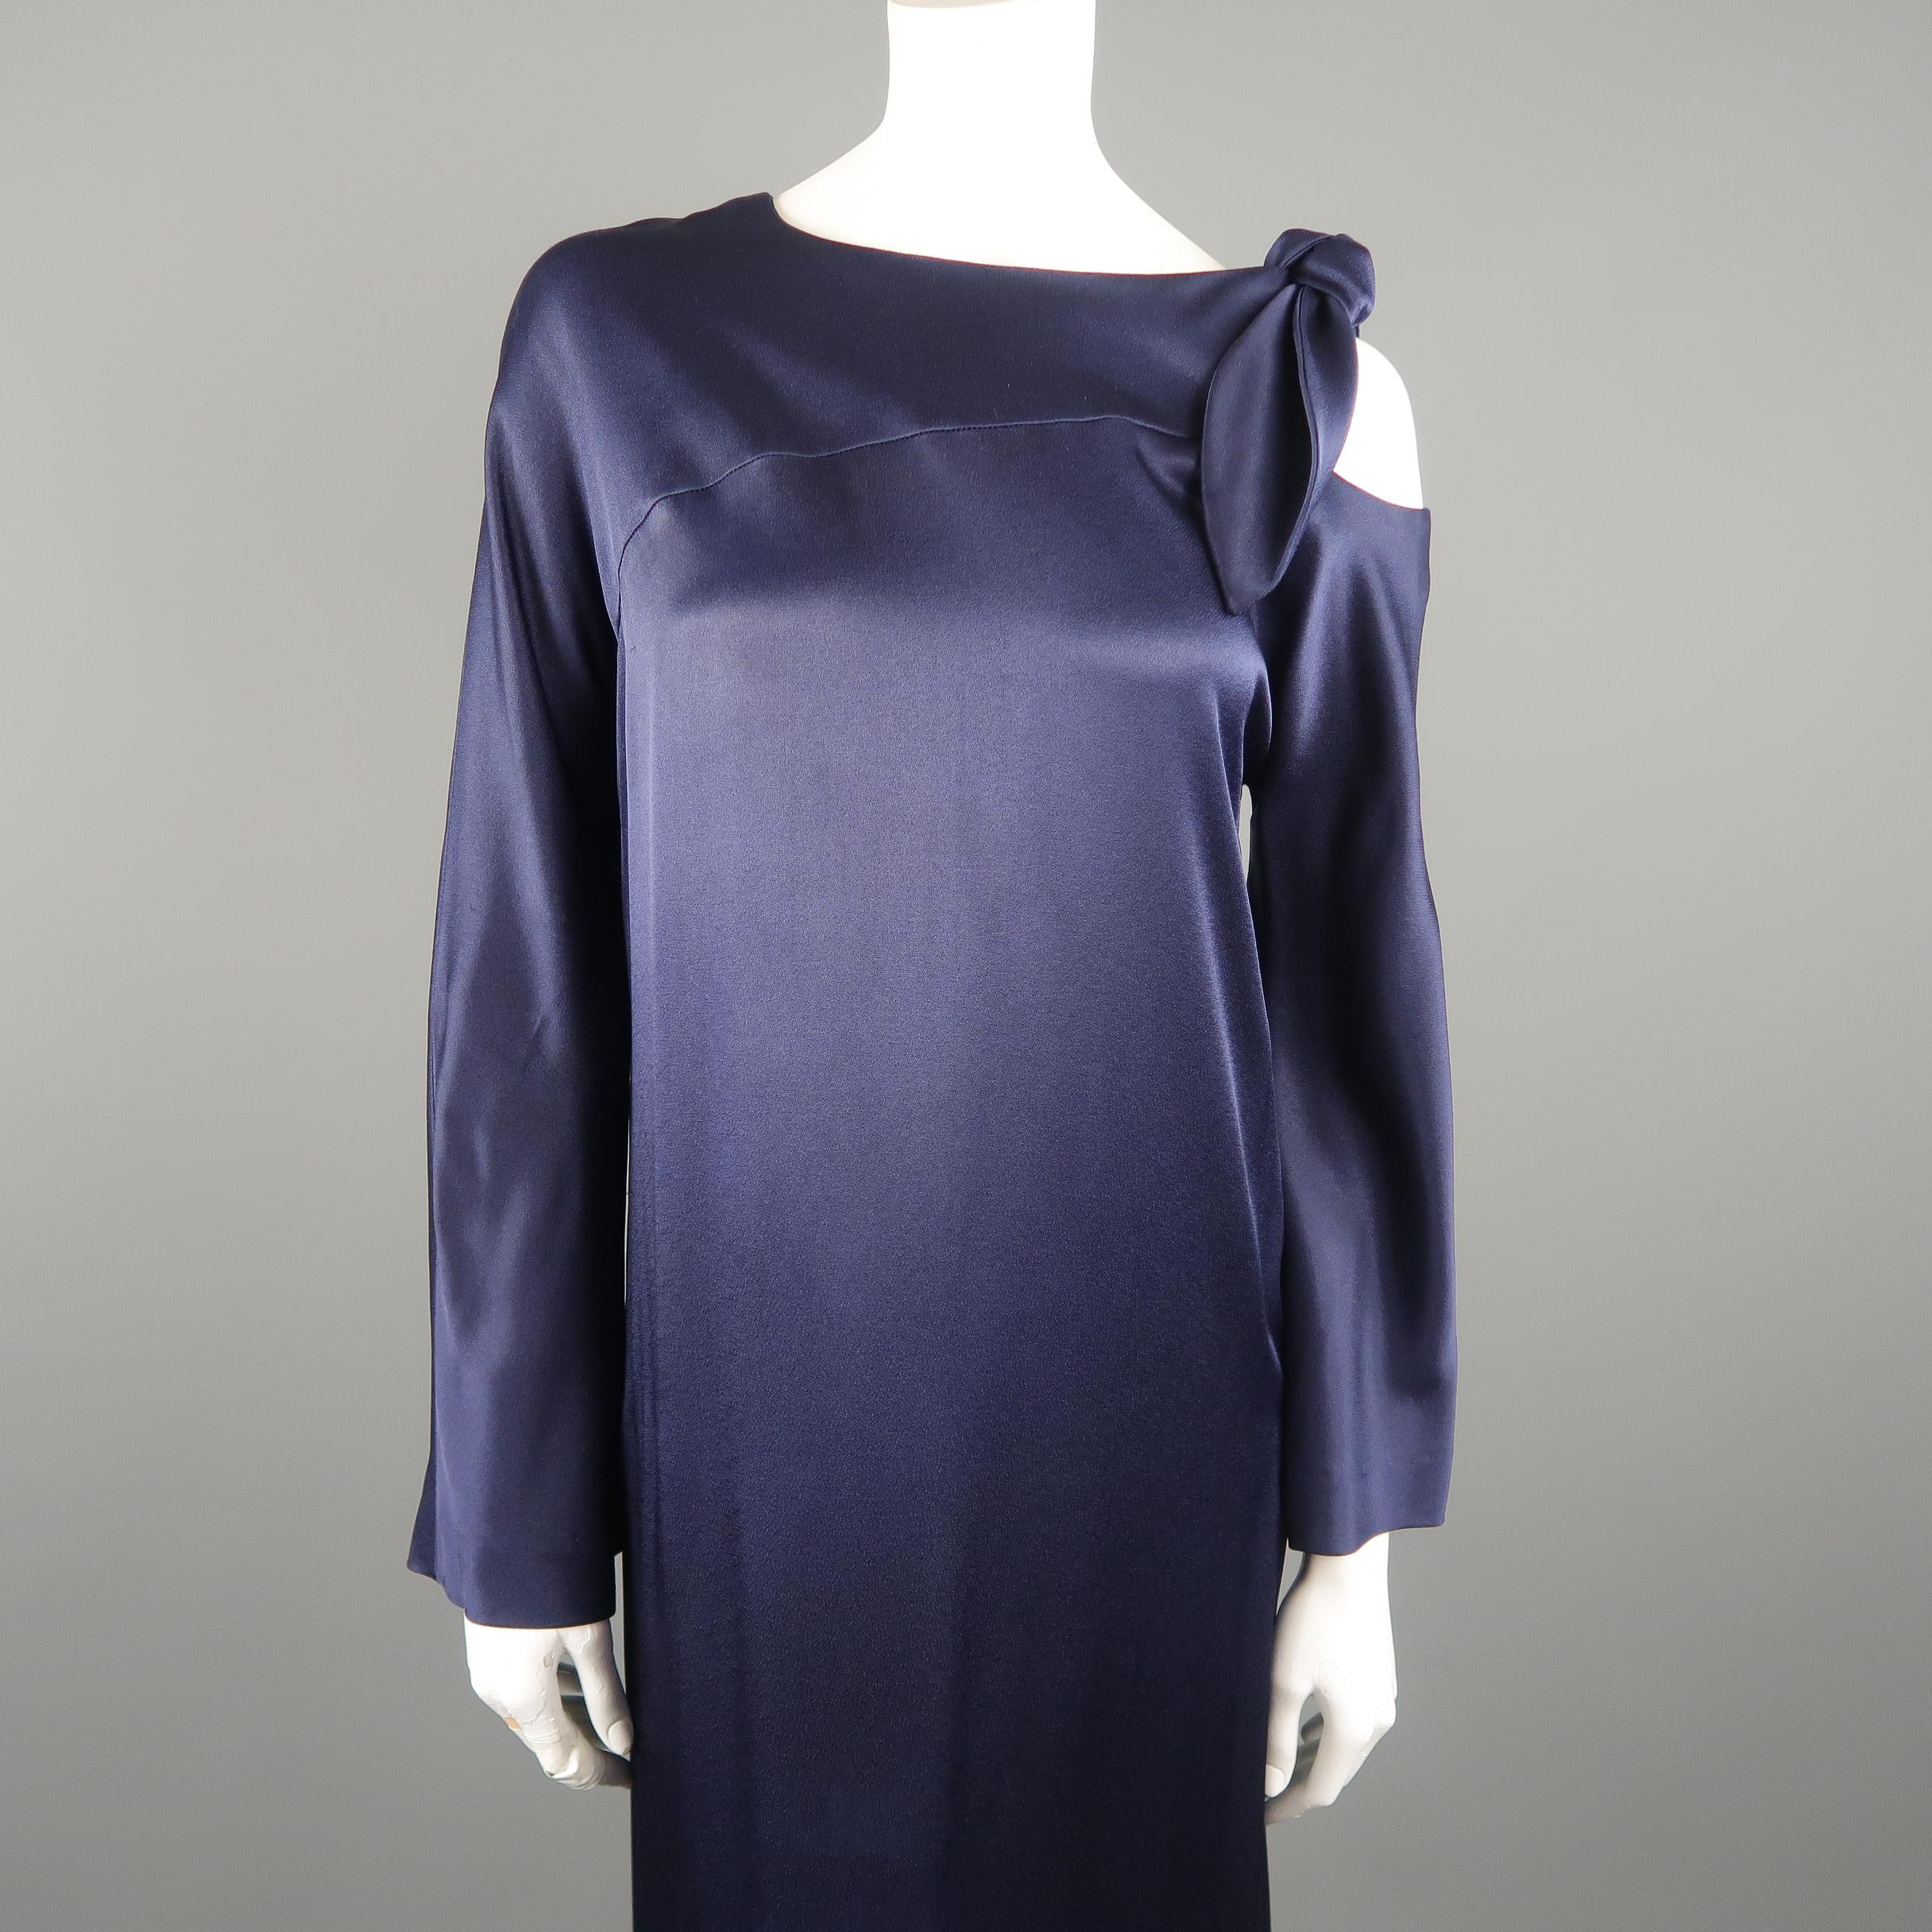 SALVATORE FERRAGAMO gown comes in navy blue textured satin with a round neck, A line silhouette, long flair sleeves, and cutout shoulder with tie detail. Care tag removed. Made in Italy.
 
Excellent Pre-Owned Condition.
Marked: (no size)
